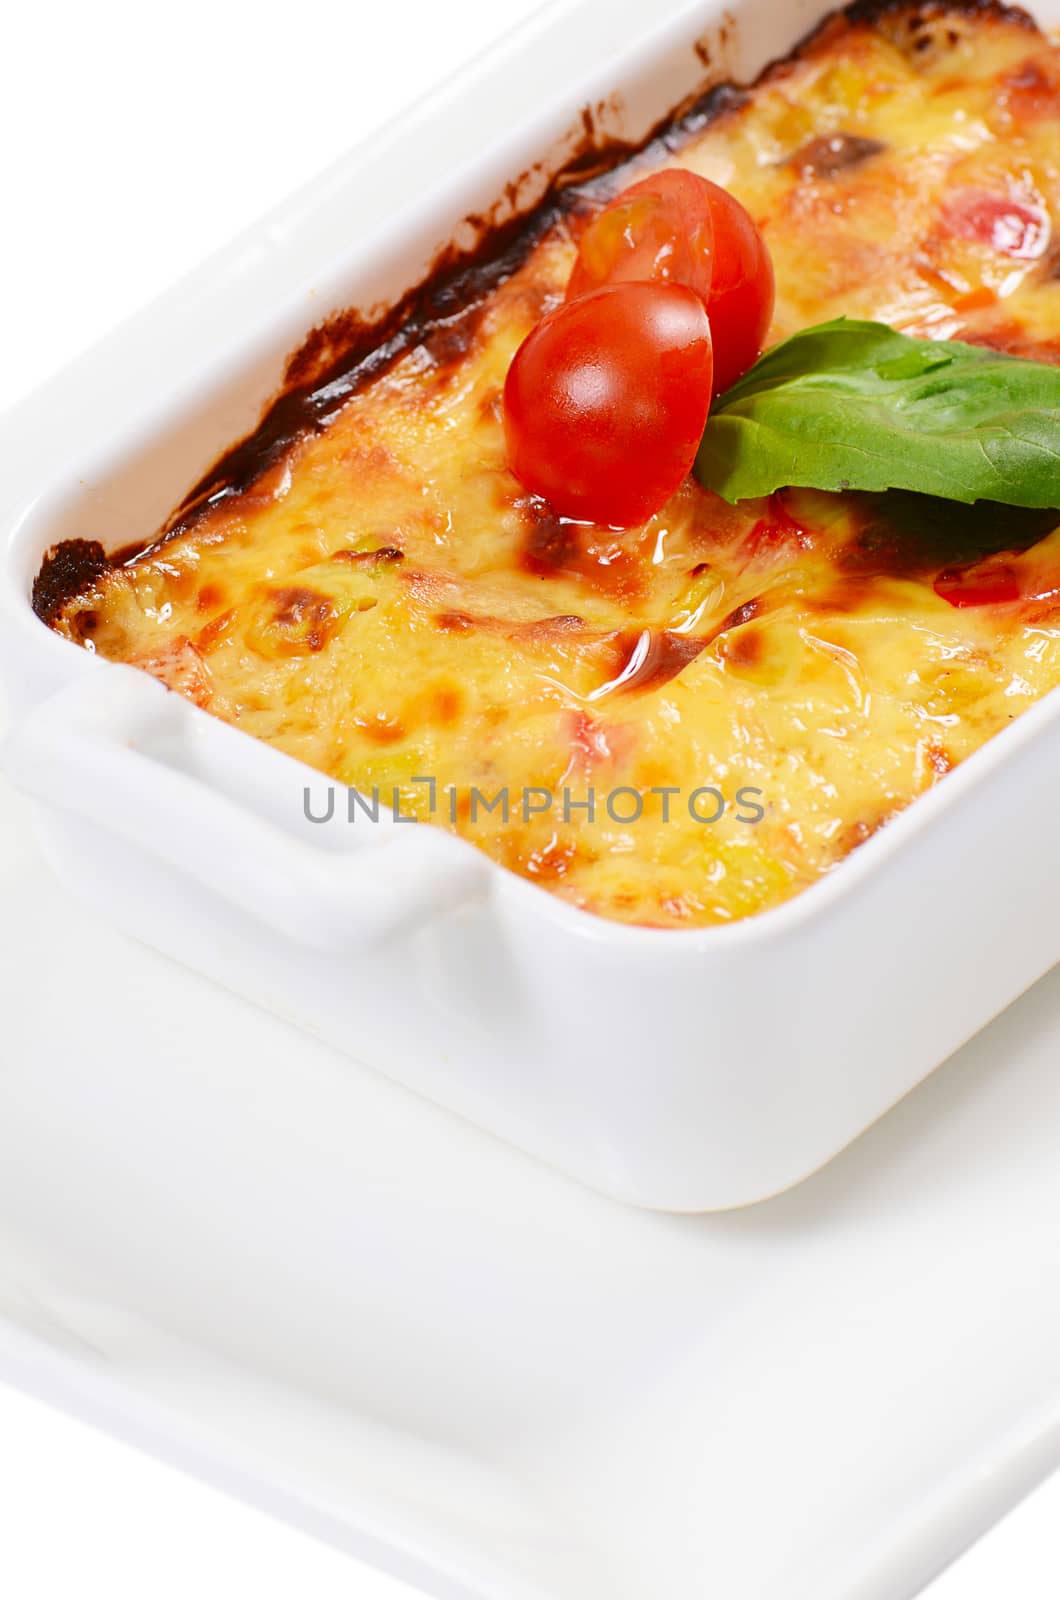 House lasagna with vegetables and mushrooms close-up